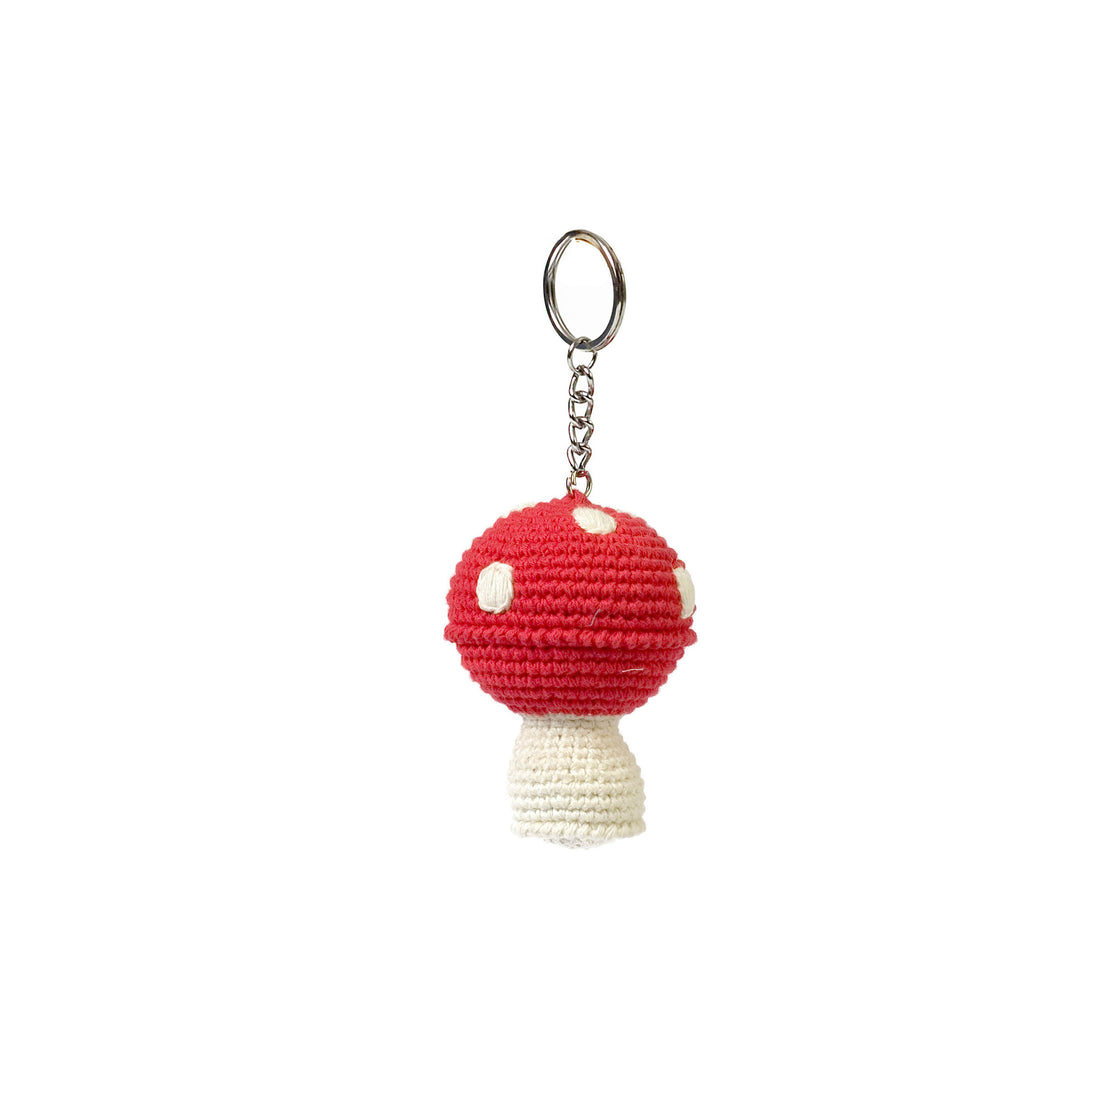 anne-claire-petit-mushroom-keyholder-red-dots-01